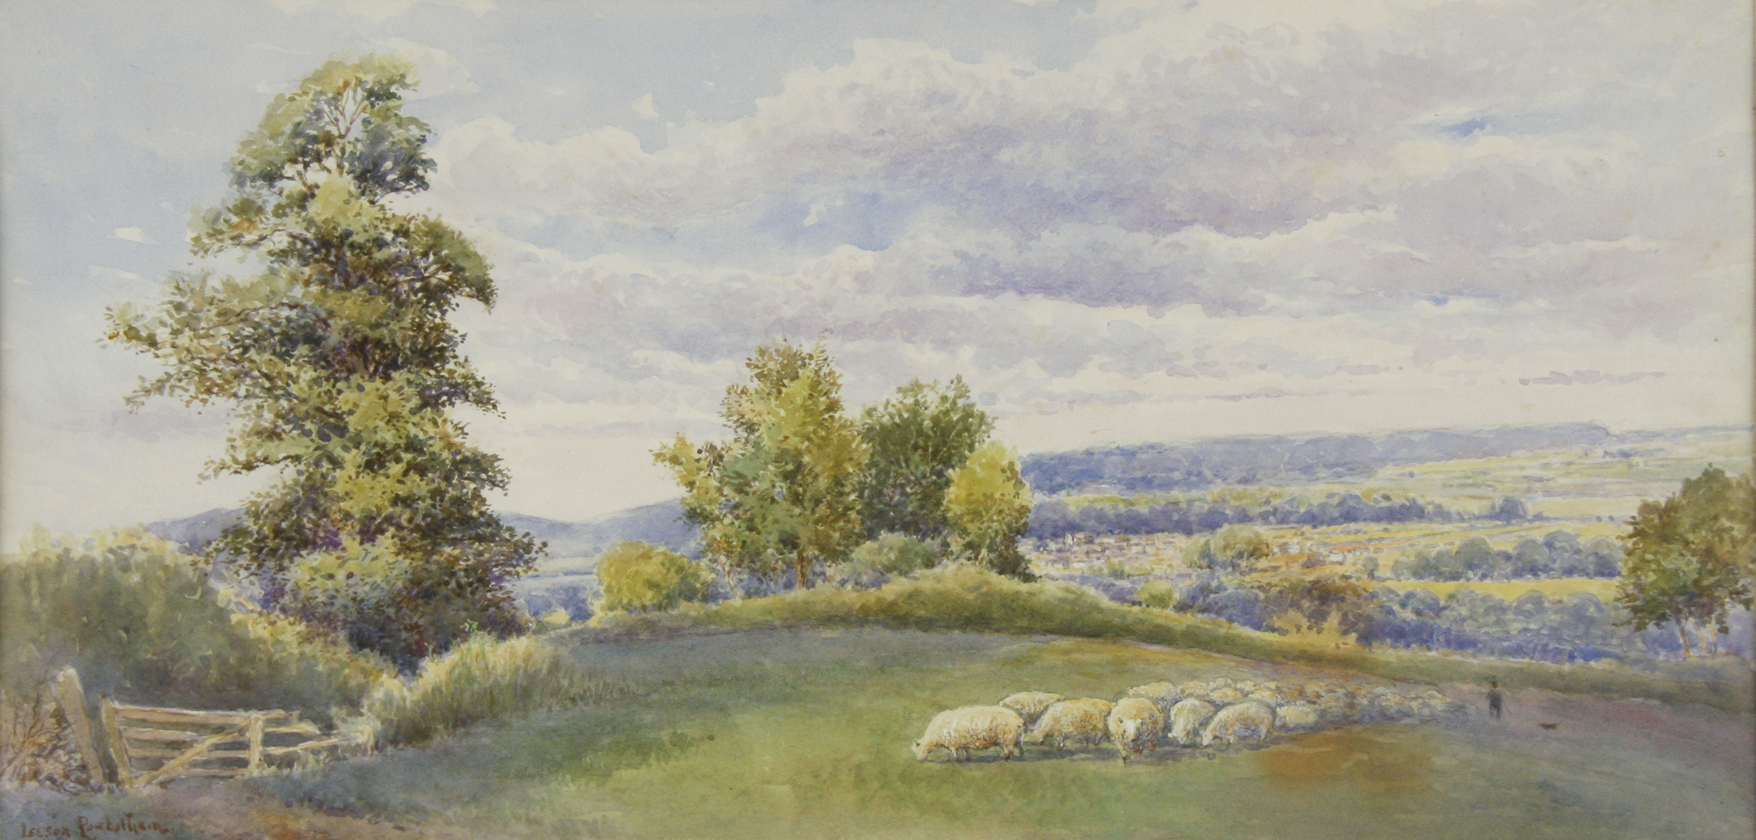 Sheep in an English Pasture